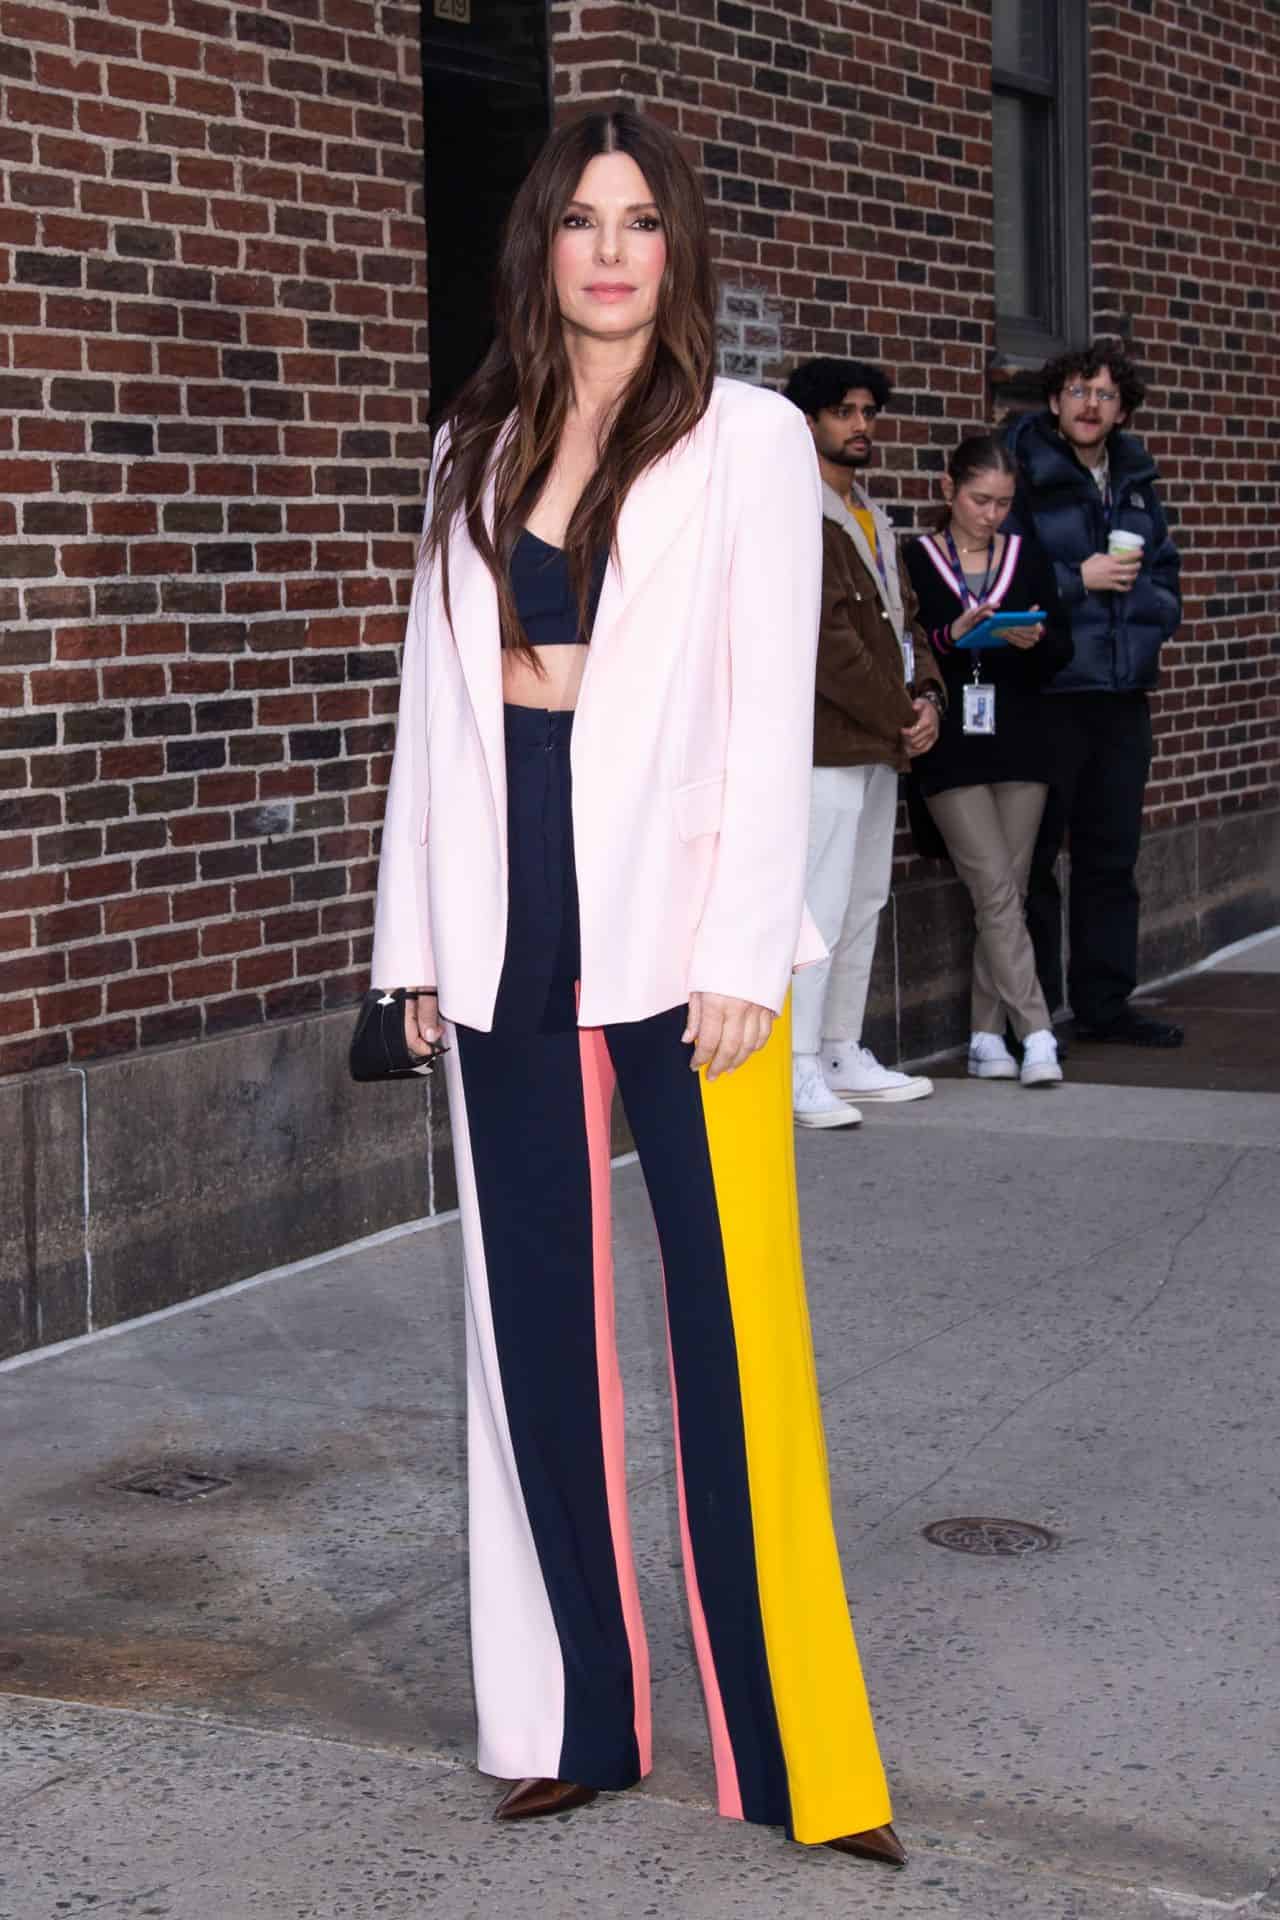 Sandra Bullock Looking Chic Ahead of her “The Late Show” Appearance in NY